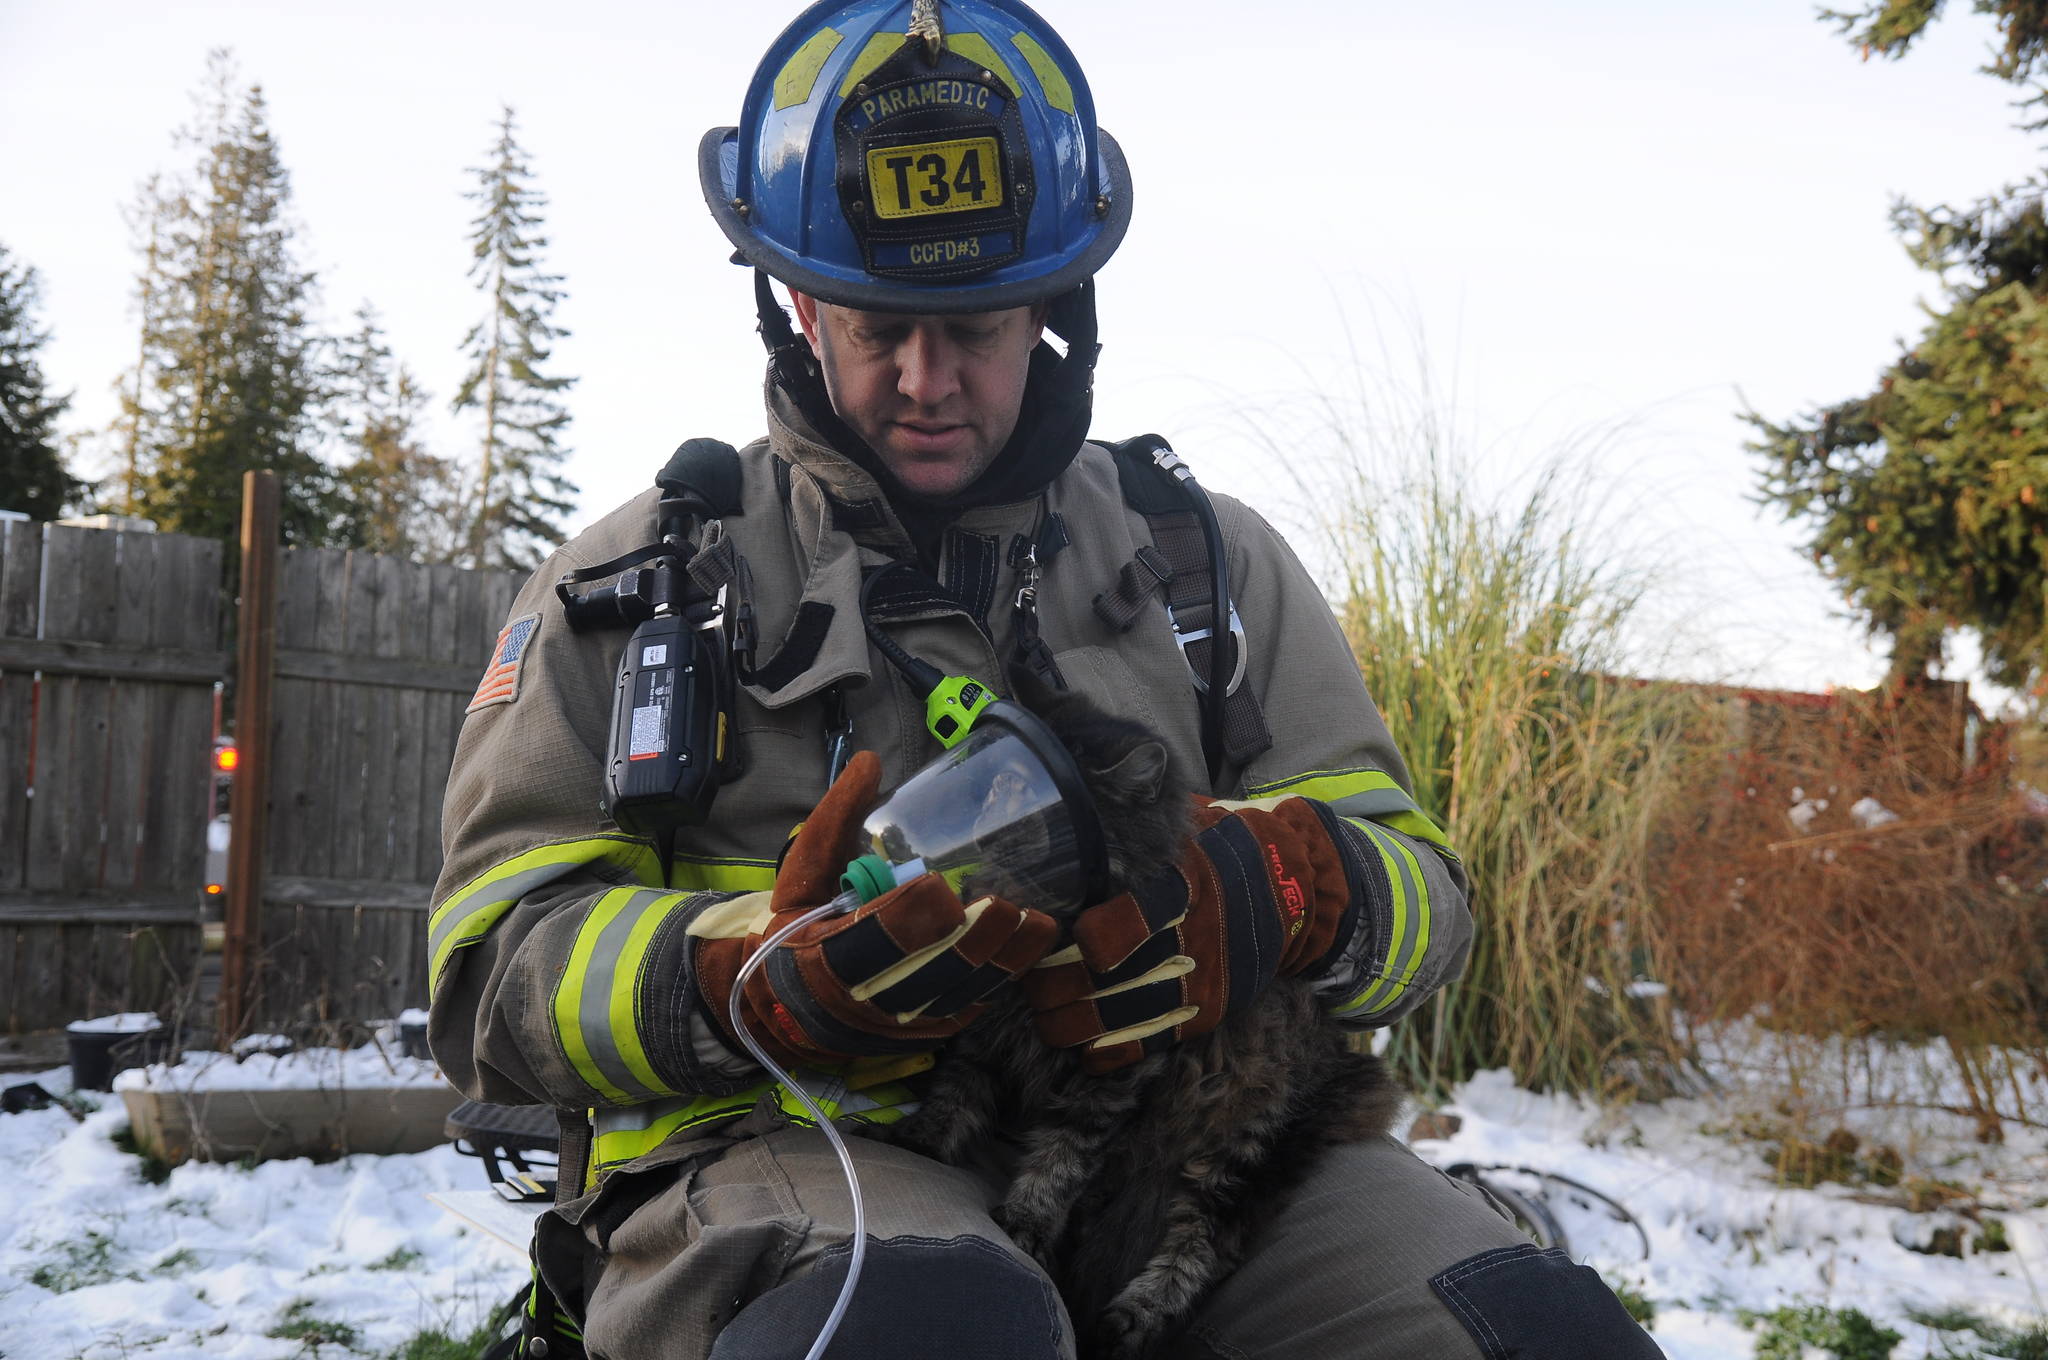 Joel Bower, Clallam County Fire District 3 firefighter/paramedic, tends to Cleopatra, a cat found inside a residence near Carlsborg damaged by an early morning fire Thursday, Feb. 7. (Michael Dashiell/Olympic Peninsula News Group)